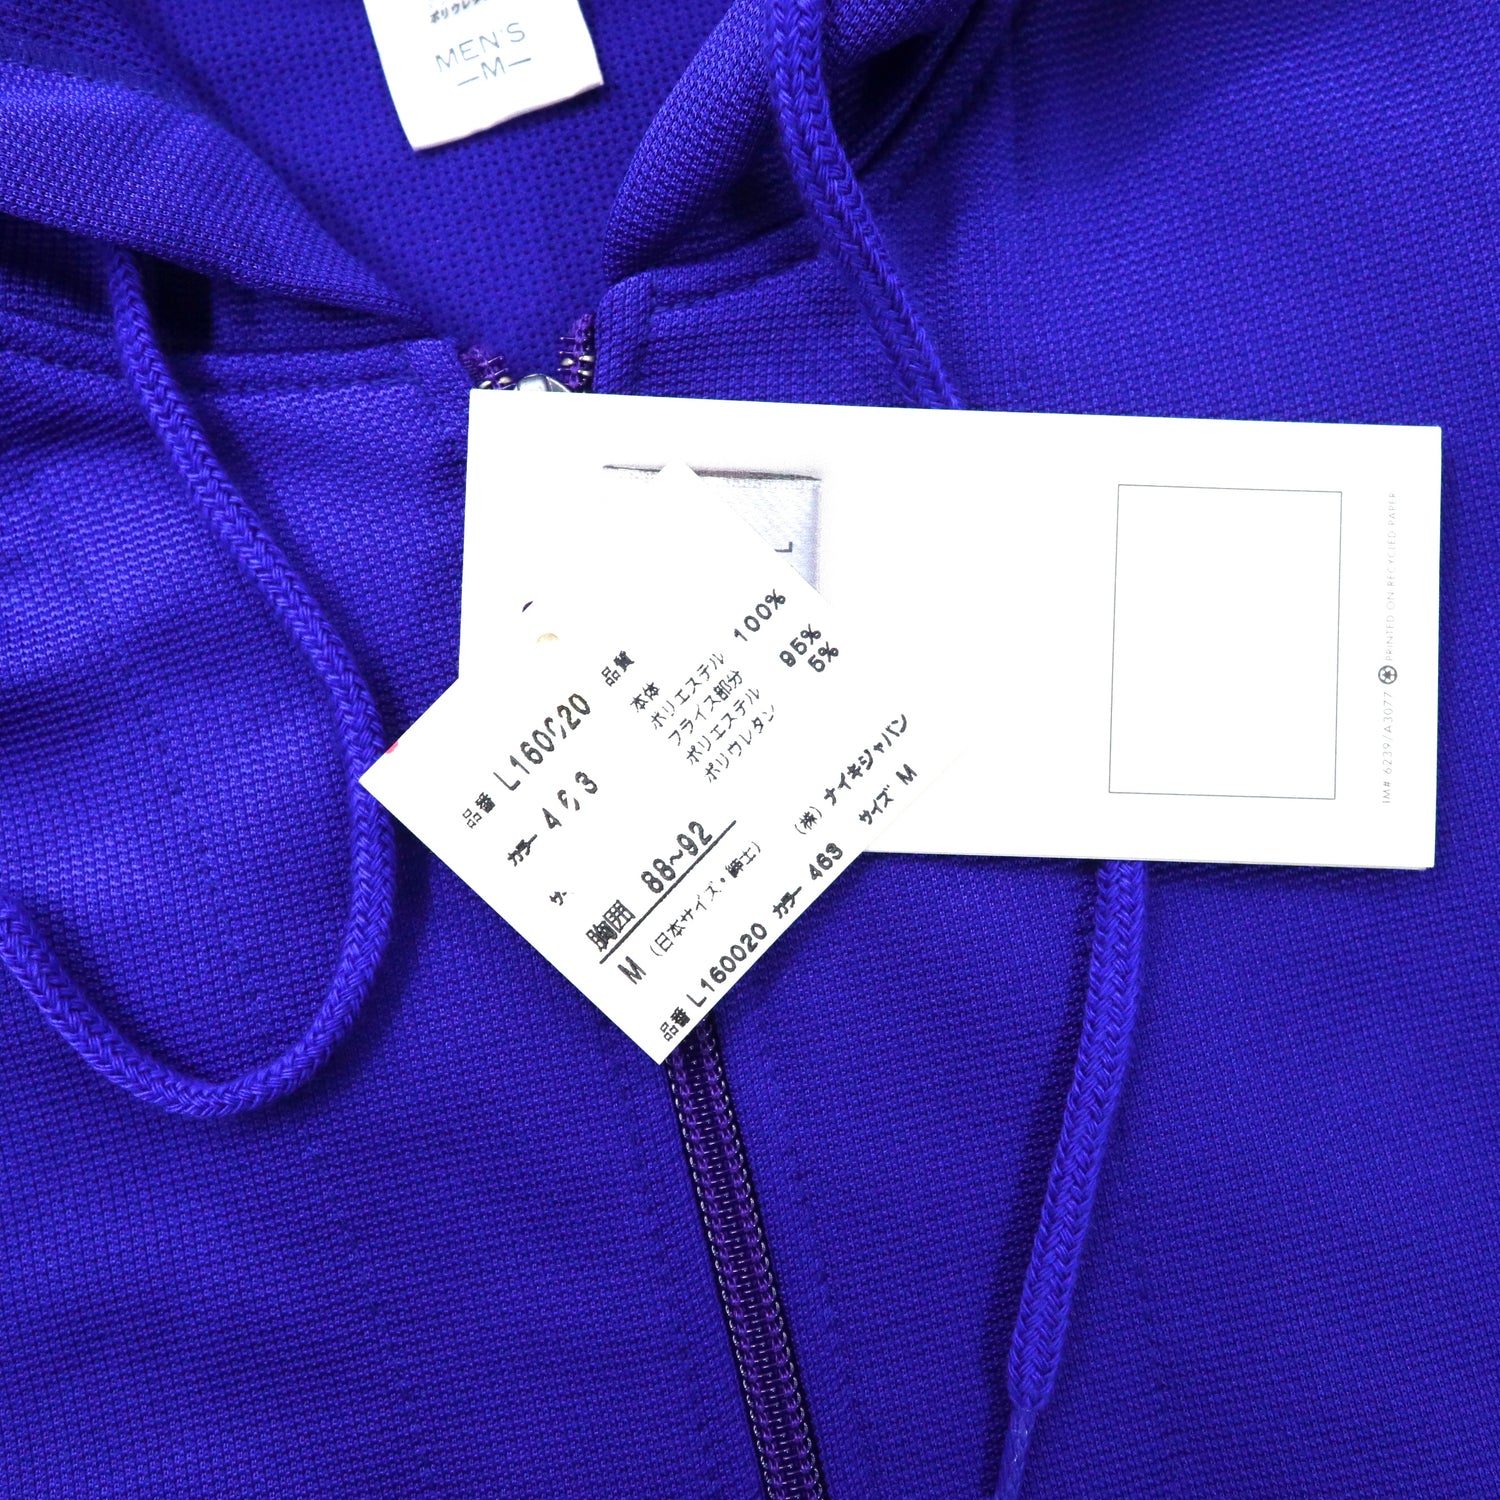 NIKE Half Zip Up Hoodie M Blue Polyester Double -sided Swash logo